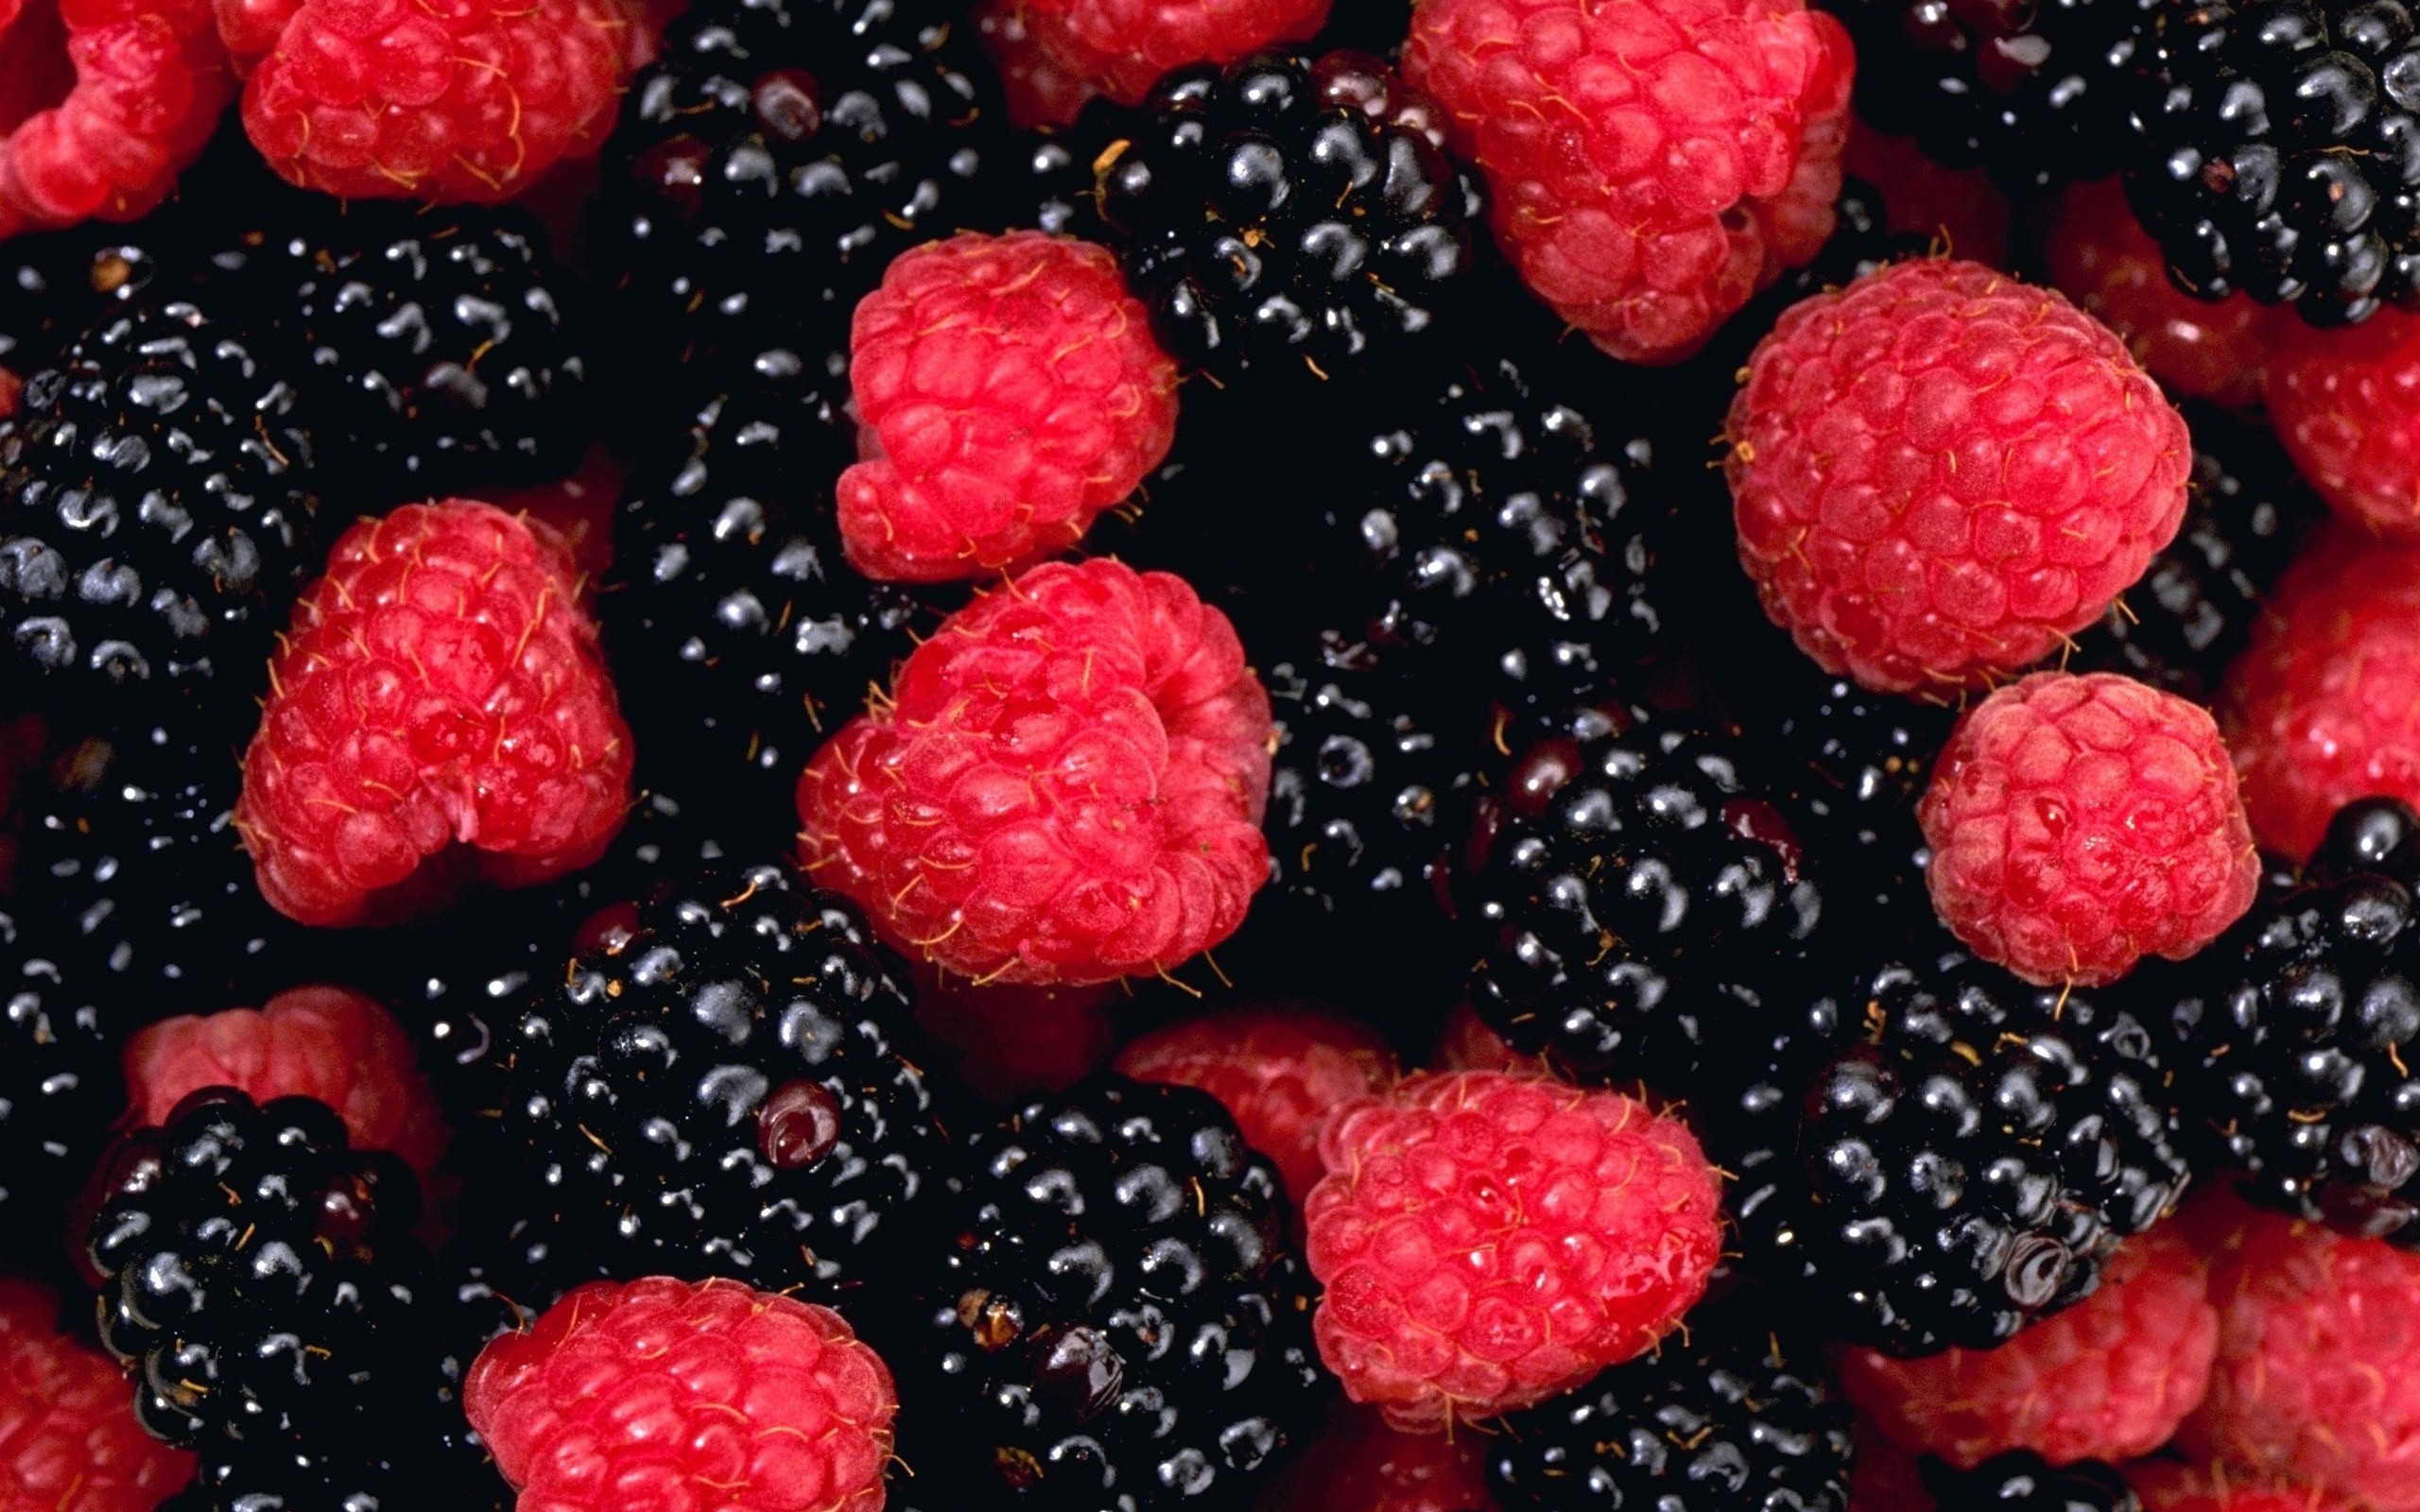 Blackberry Fruit Wallpaper HD Photos Pictures In High